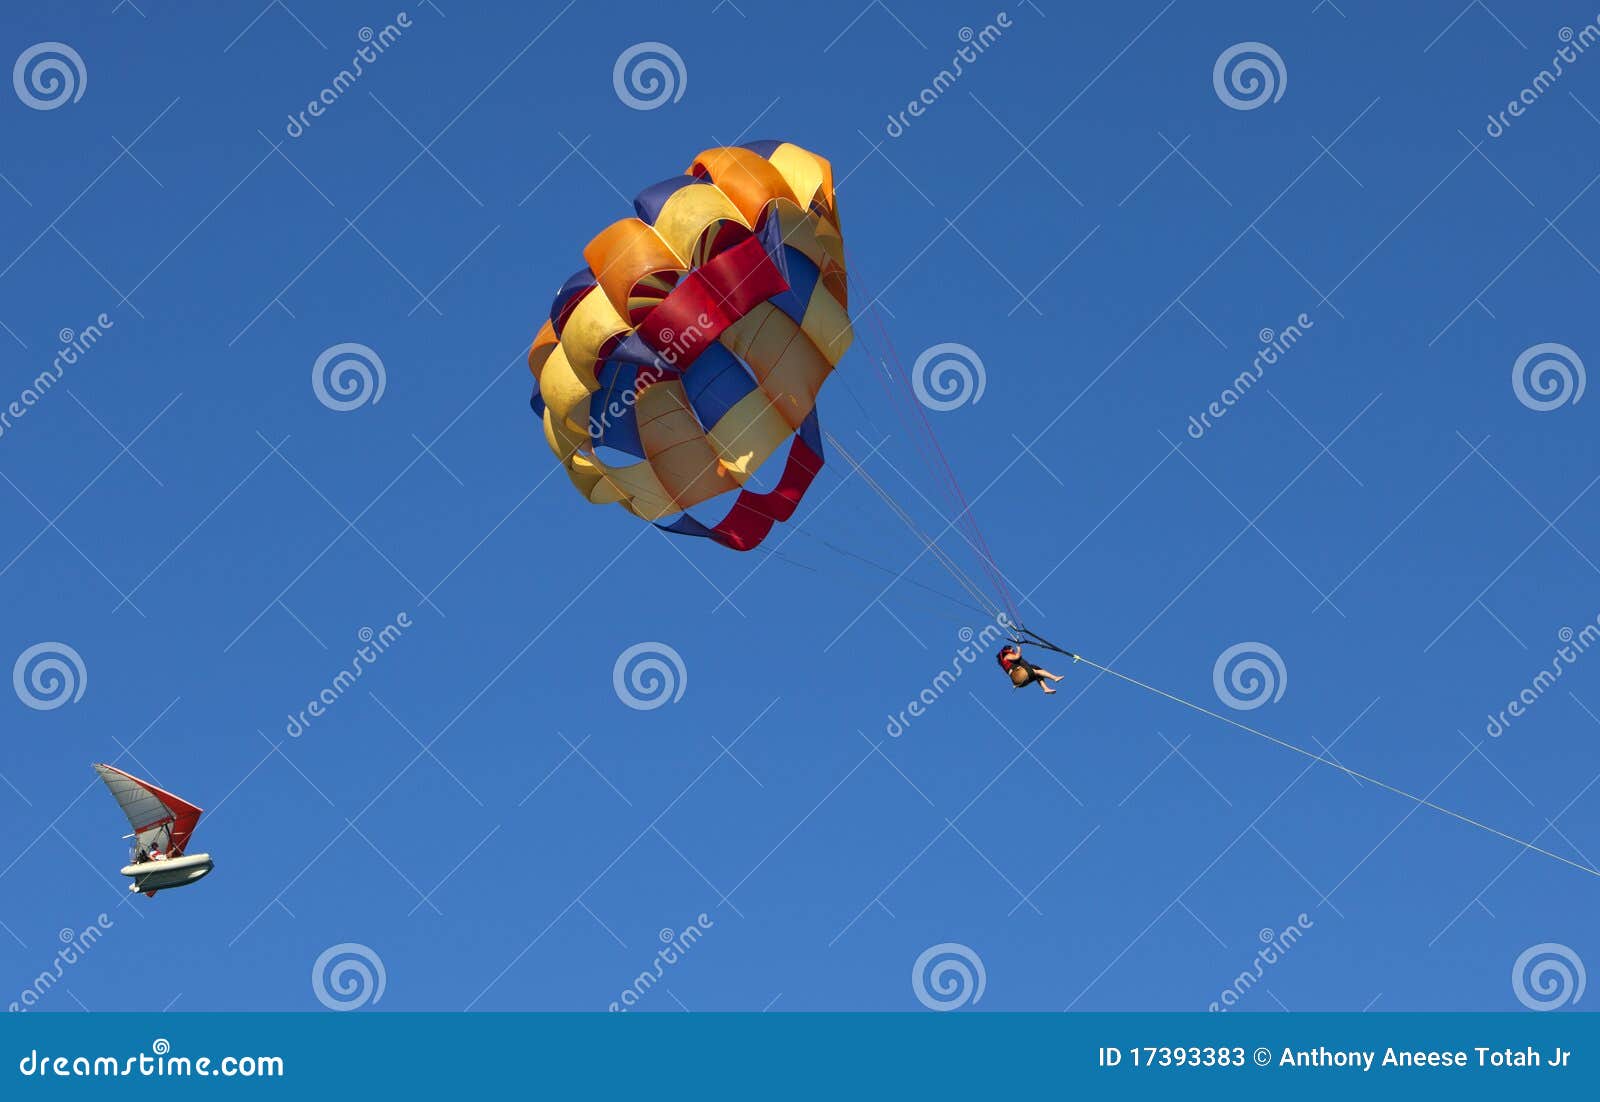 parasail and flying boat